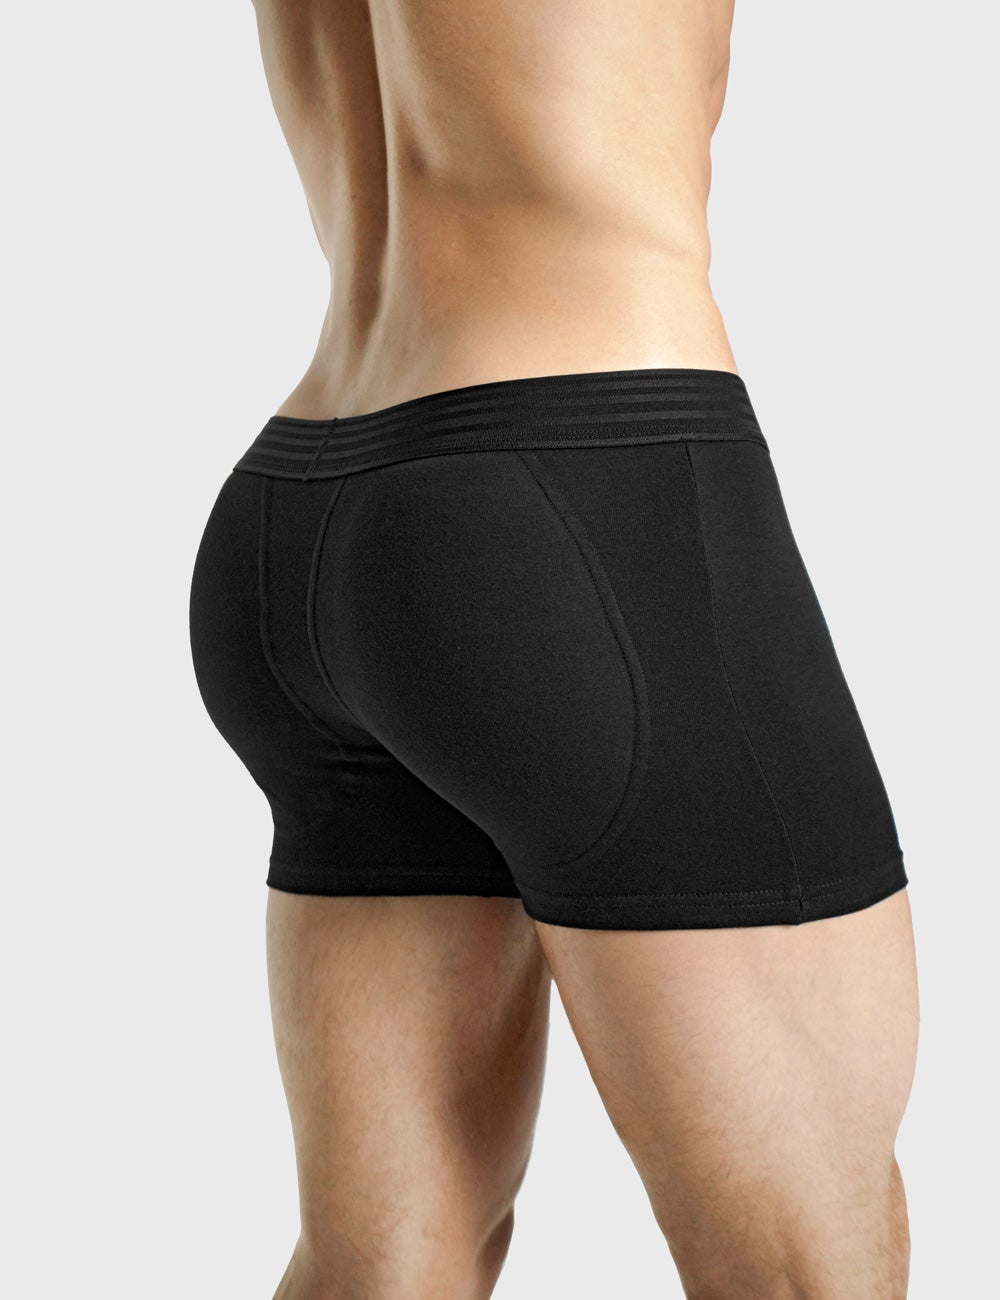 Padded Boxer Brief + Smart Package Cup – Rounderbum Canada